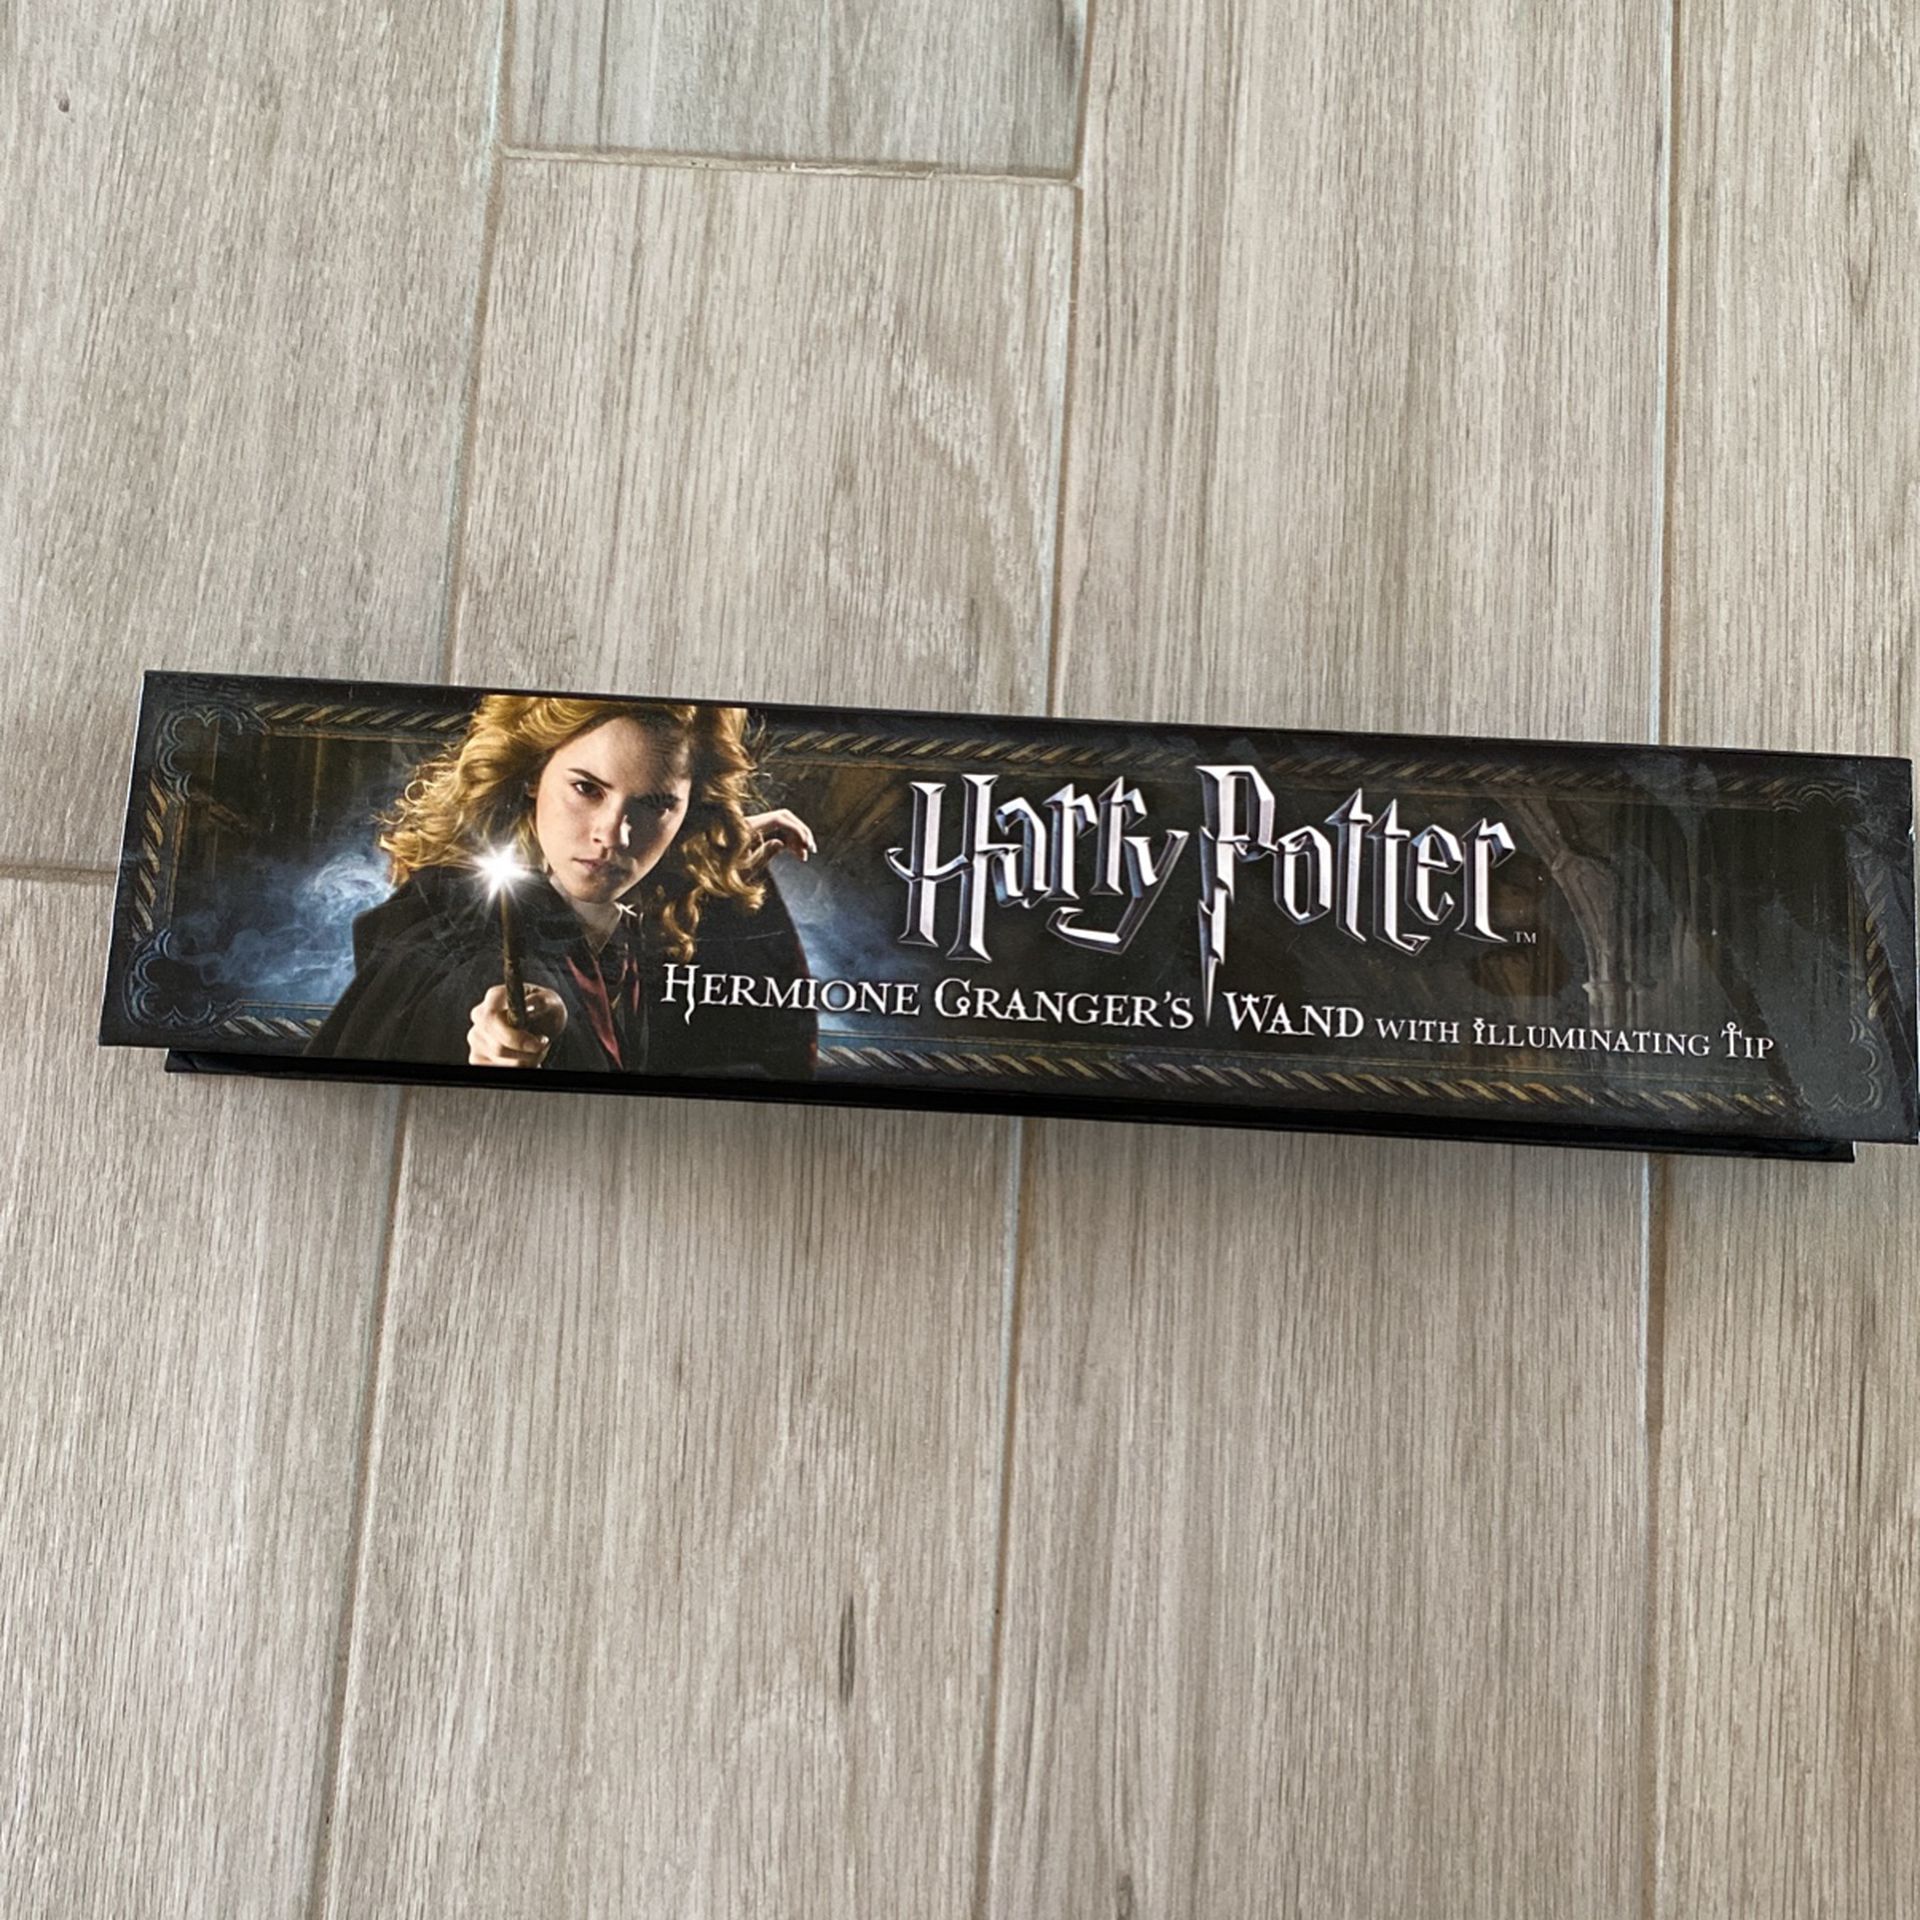 Harry Potter Hermione Granger’s Wand